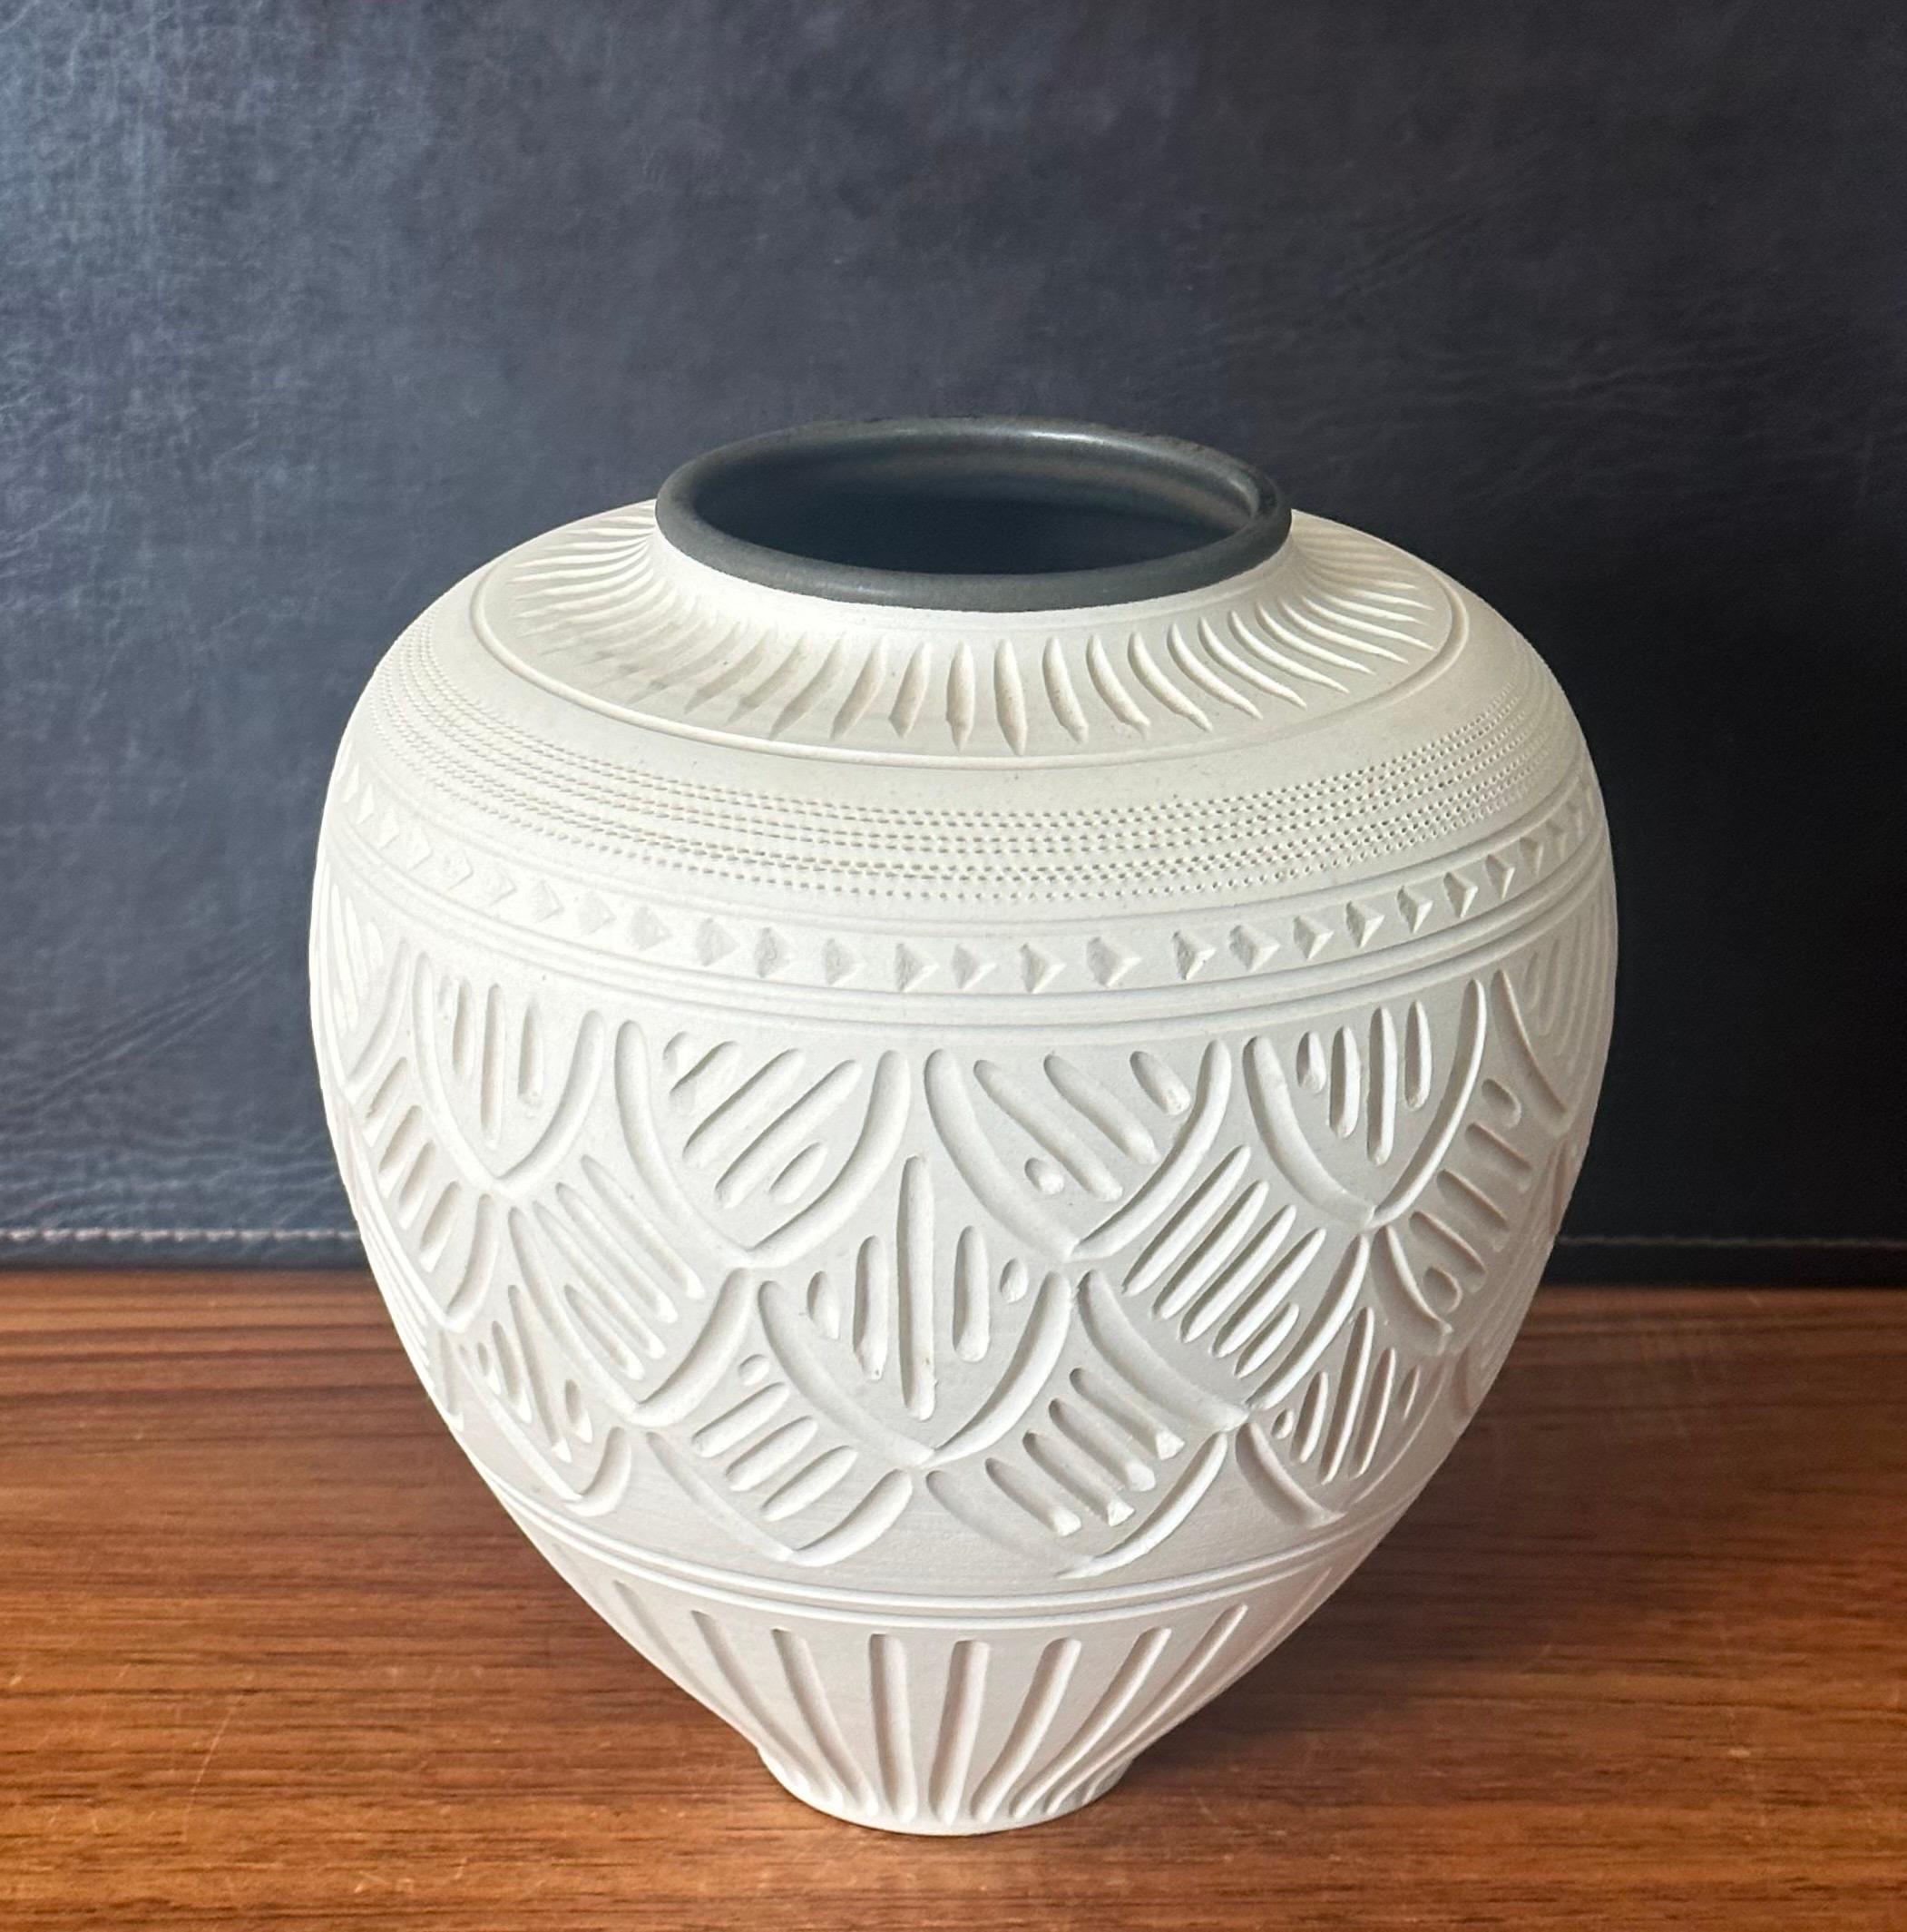 German Incised Geometric Design Bisque Porcelain Vase by Nancy Smith For Sale